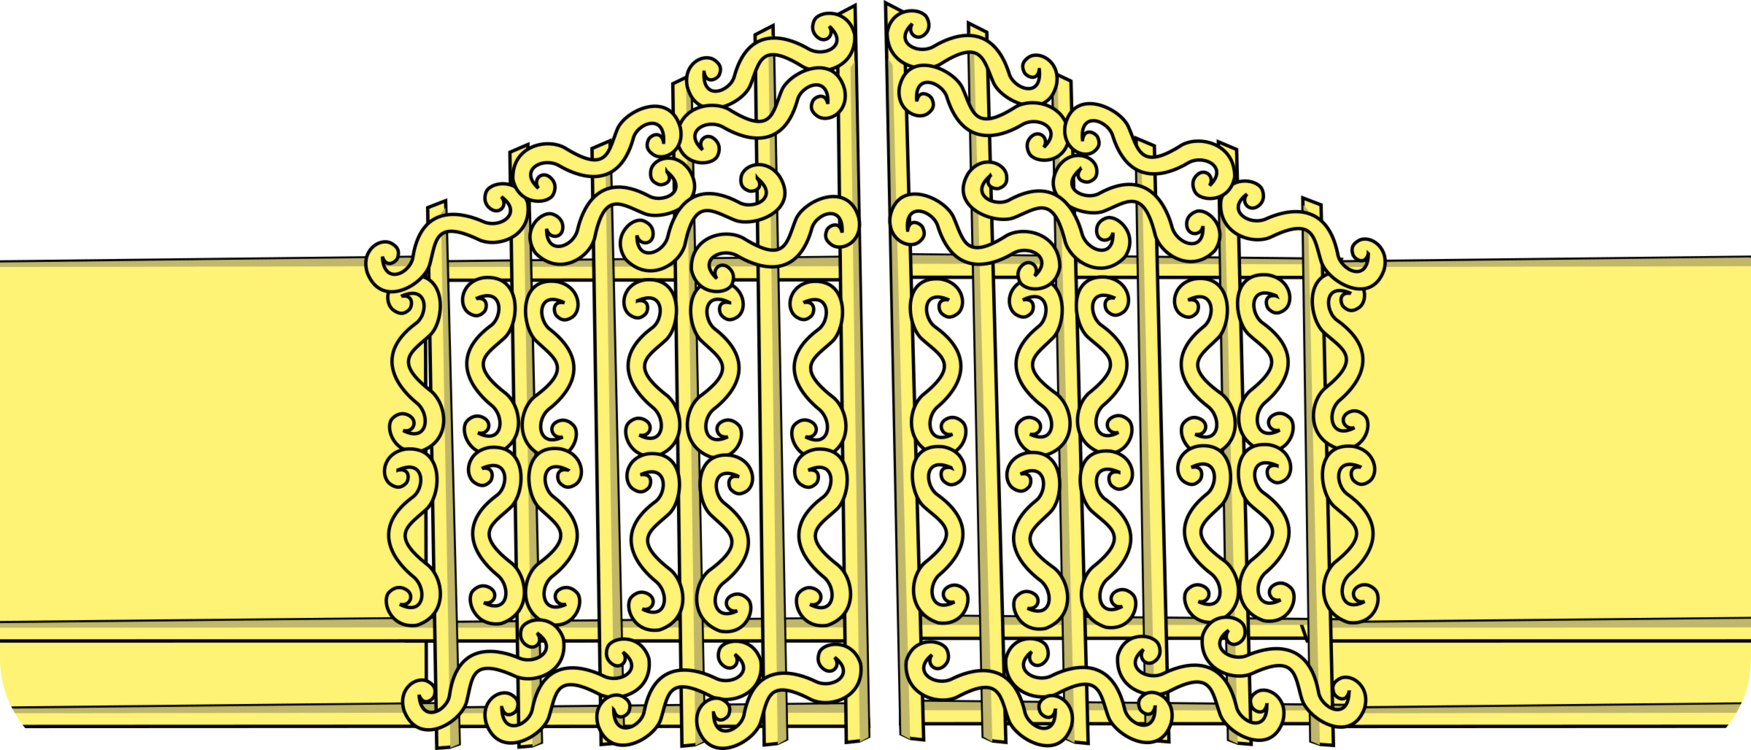 pearly gates of heaven clipart